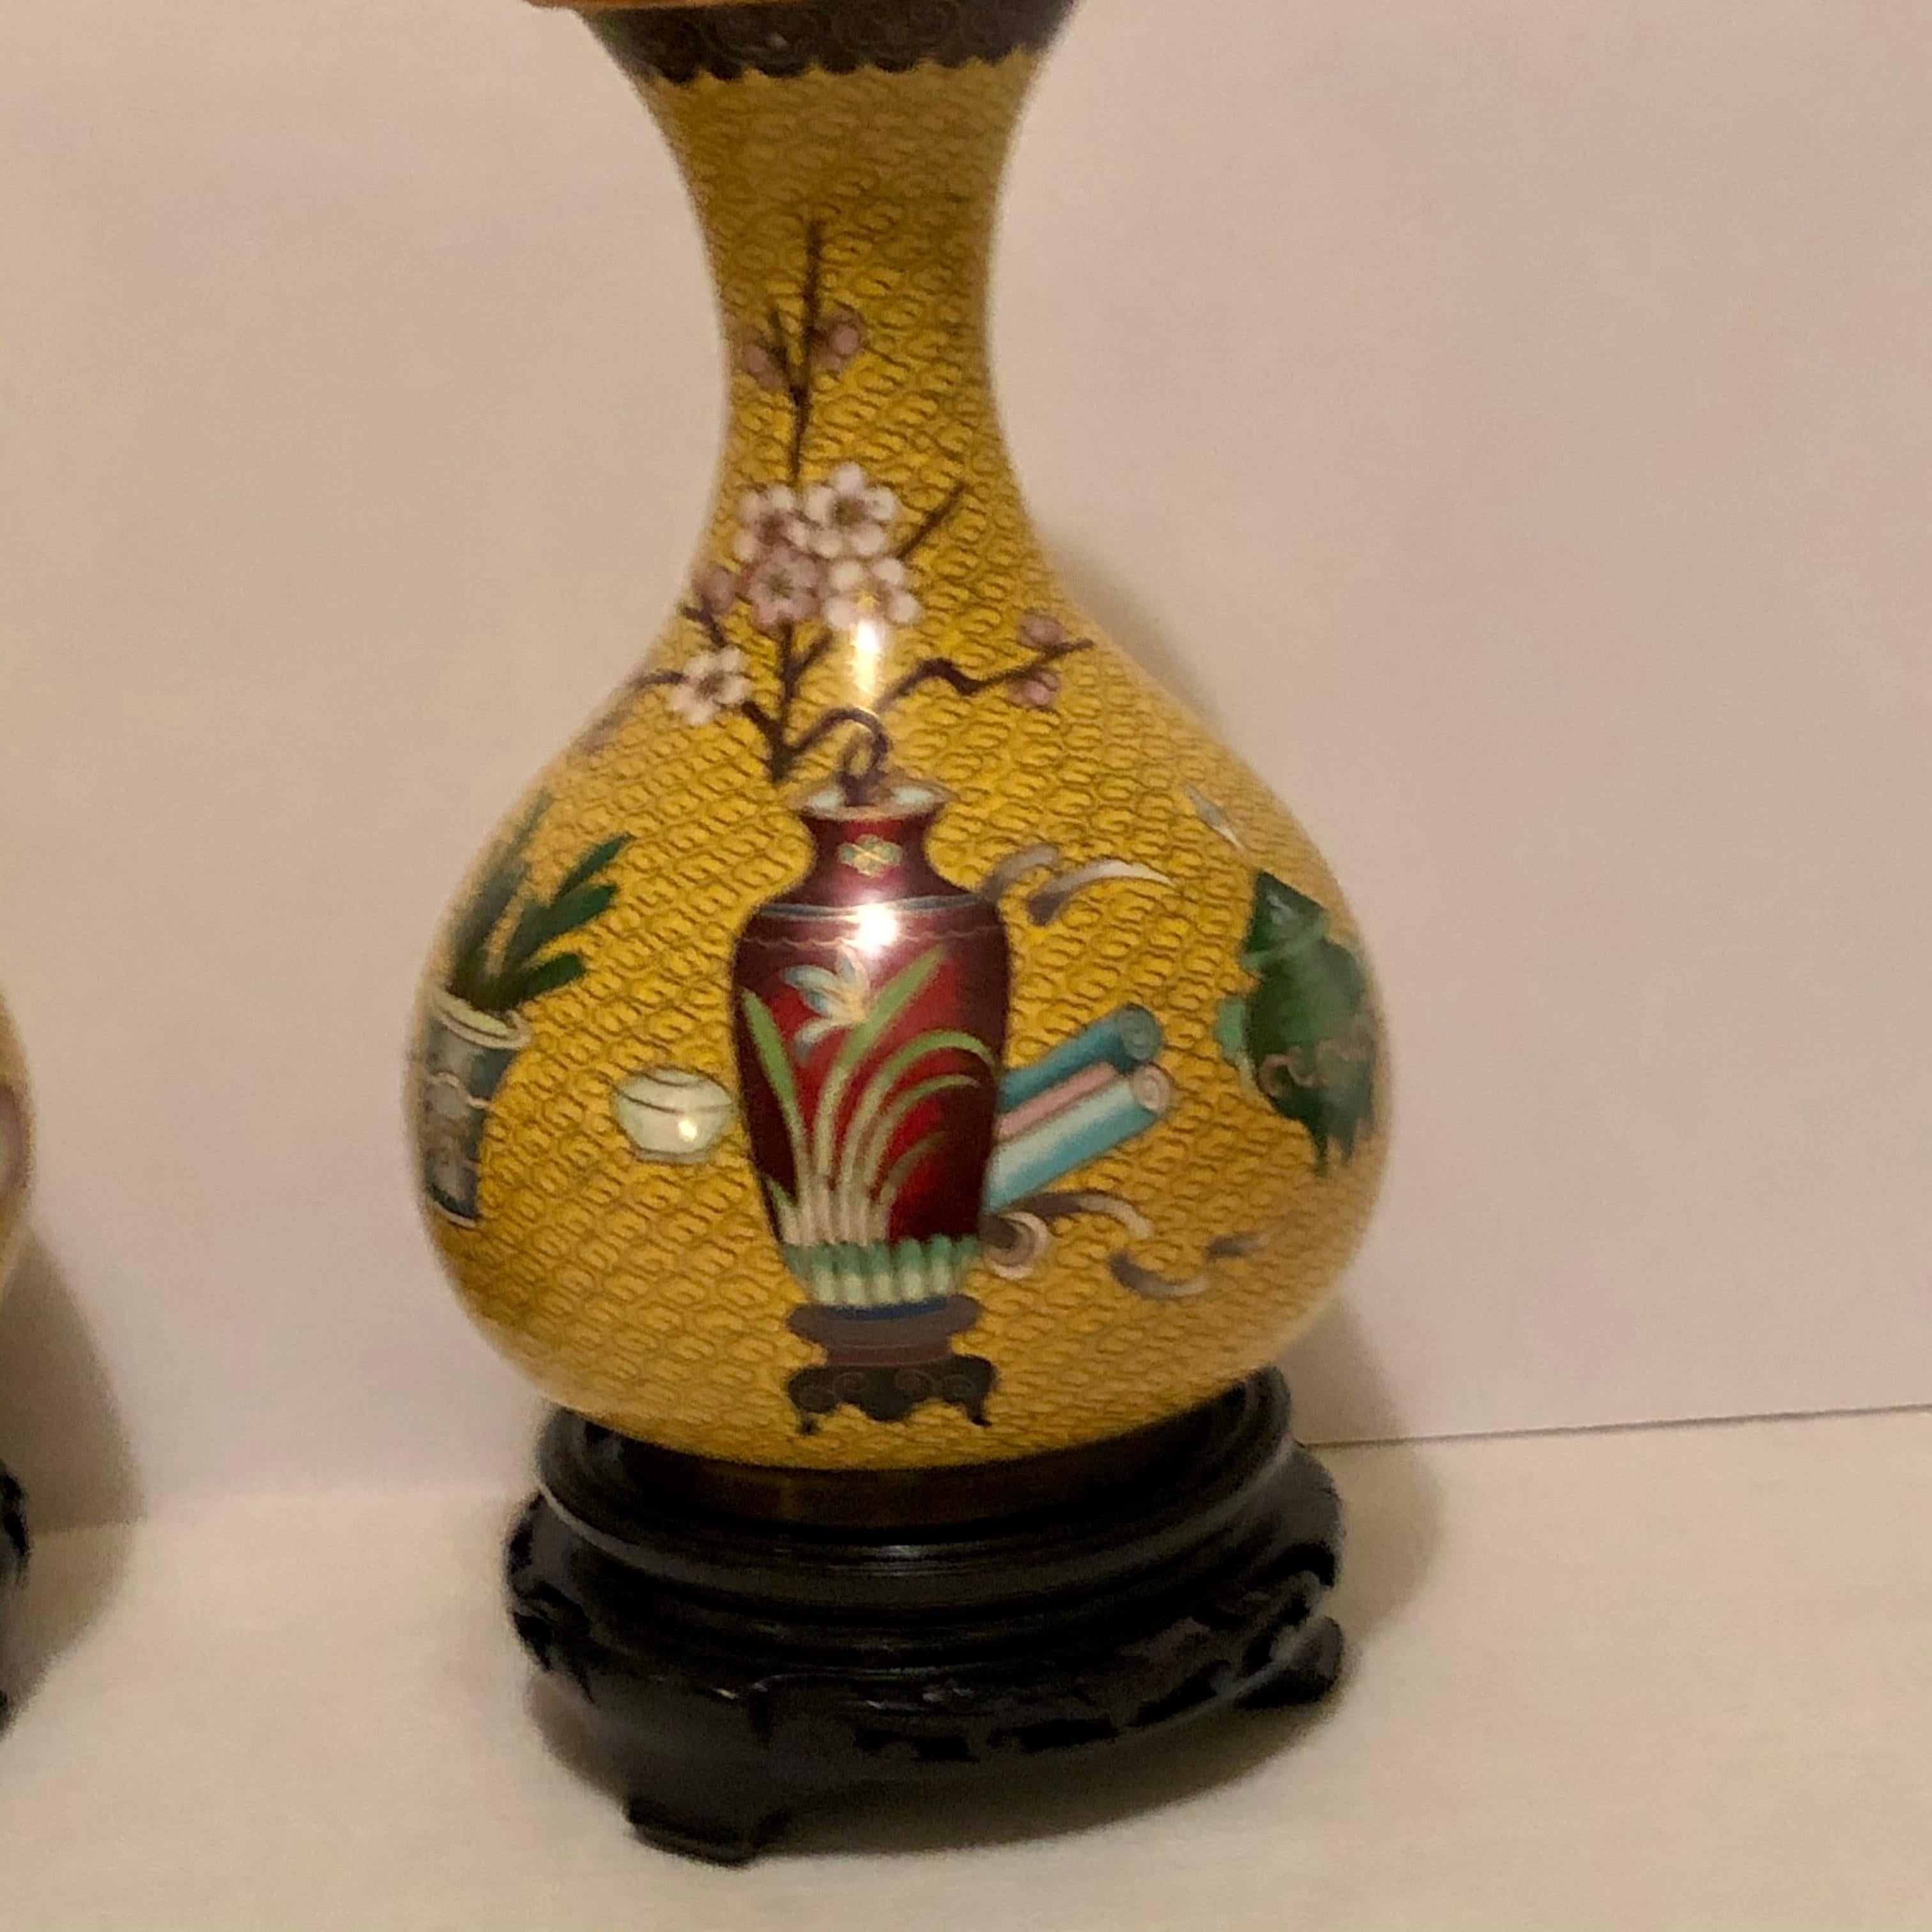 Enamel Pair of Yellow Chinese Cloisonné Vases with a Chinese Red Vase & Prunus Flowers